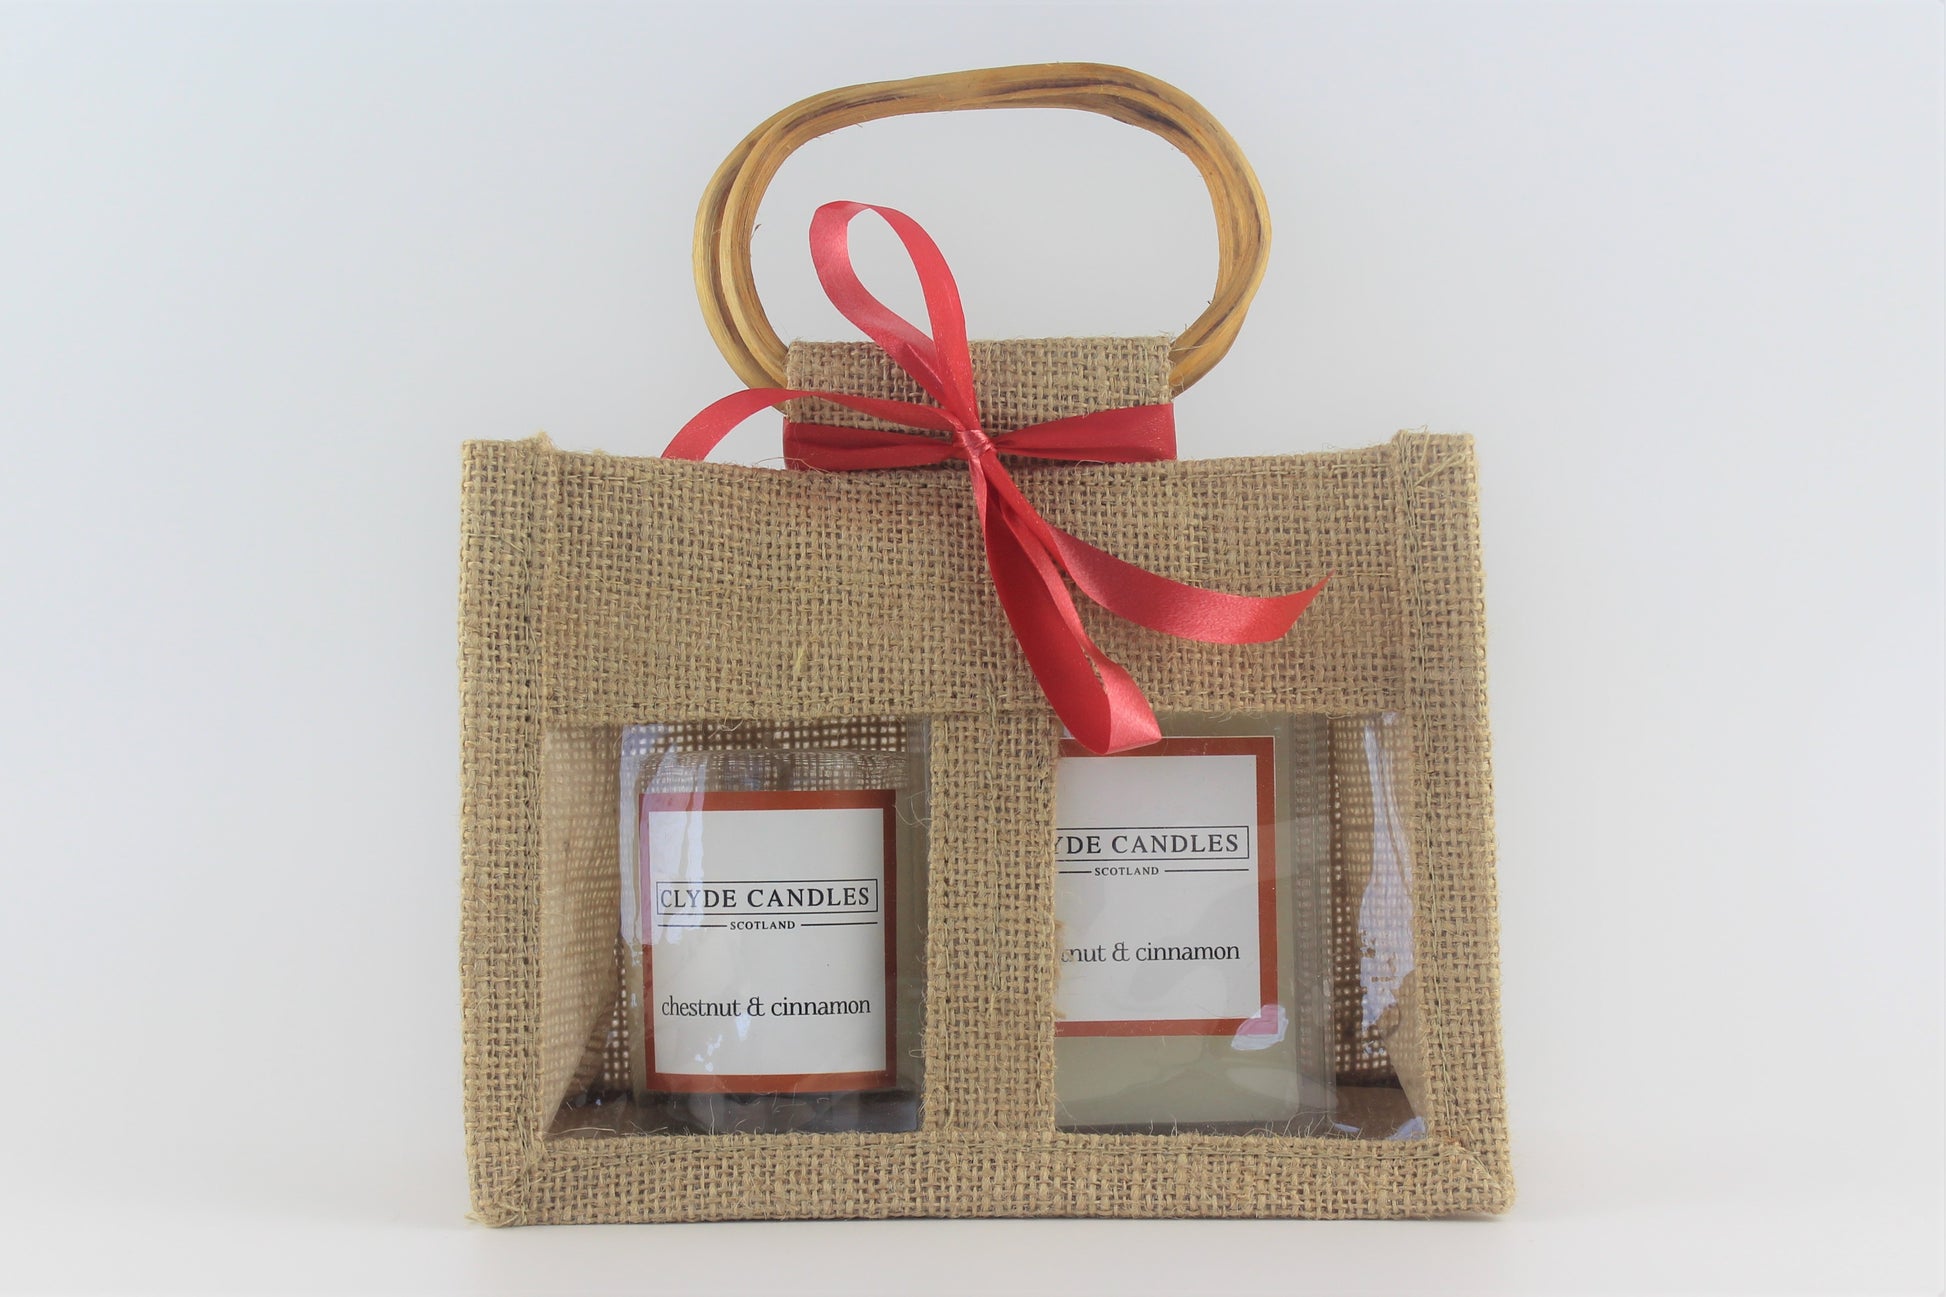 Clyde Candles Votive & Wax Melt Gift Set - Chestnut & Cinnamon Natural Soy Candle, Vegan friendly